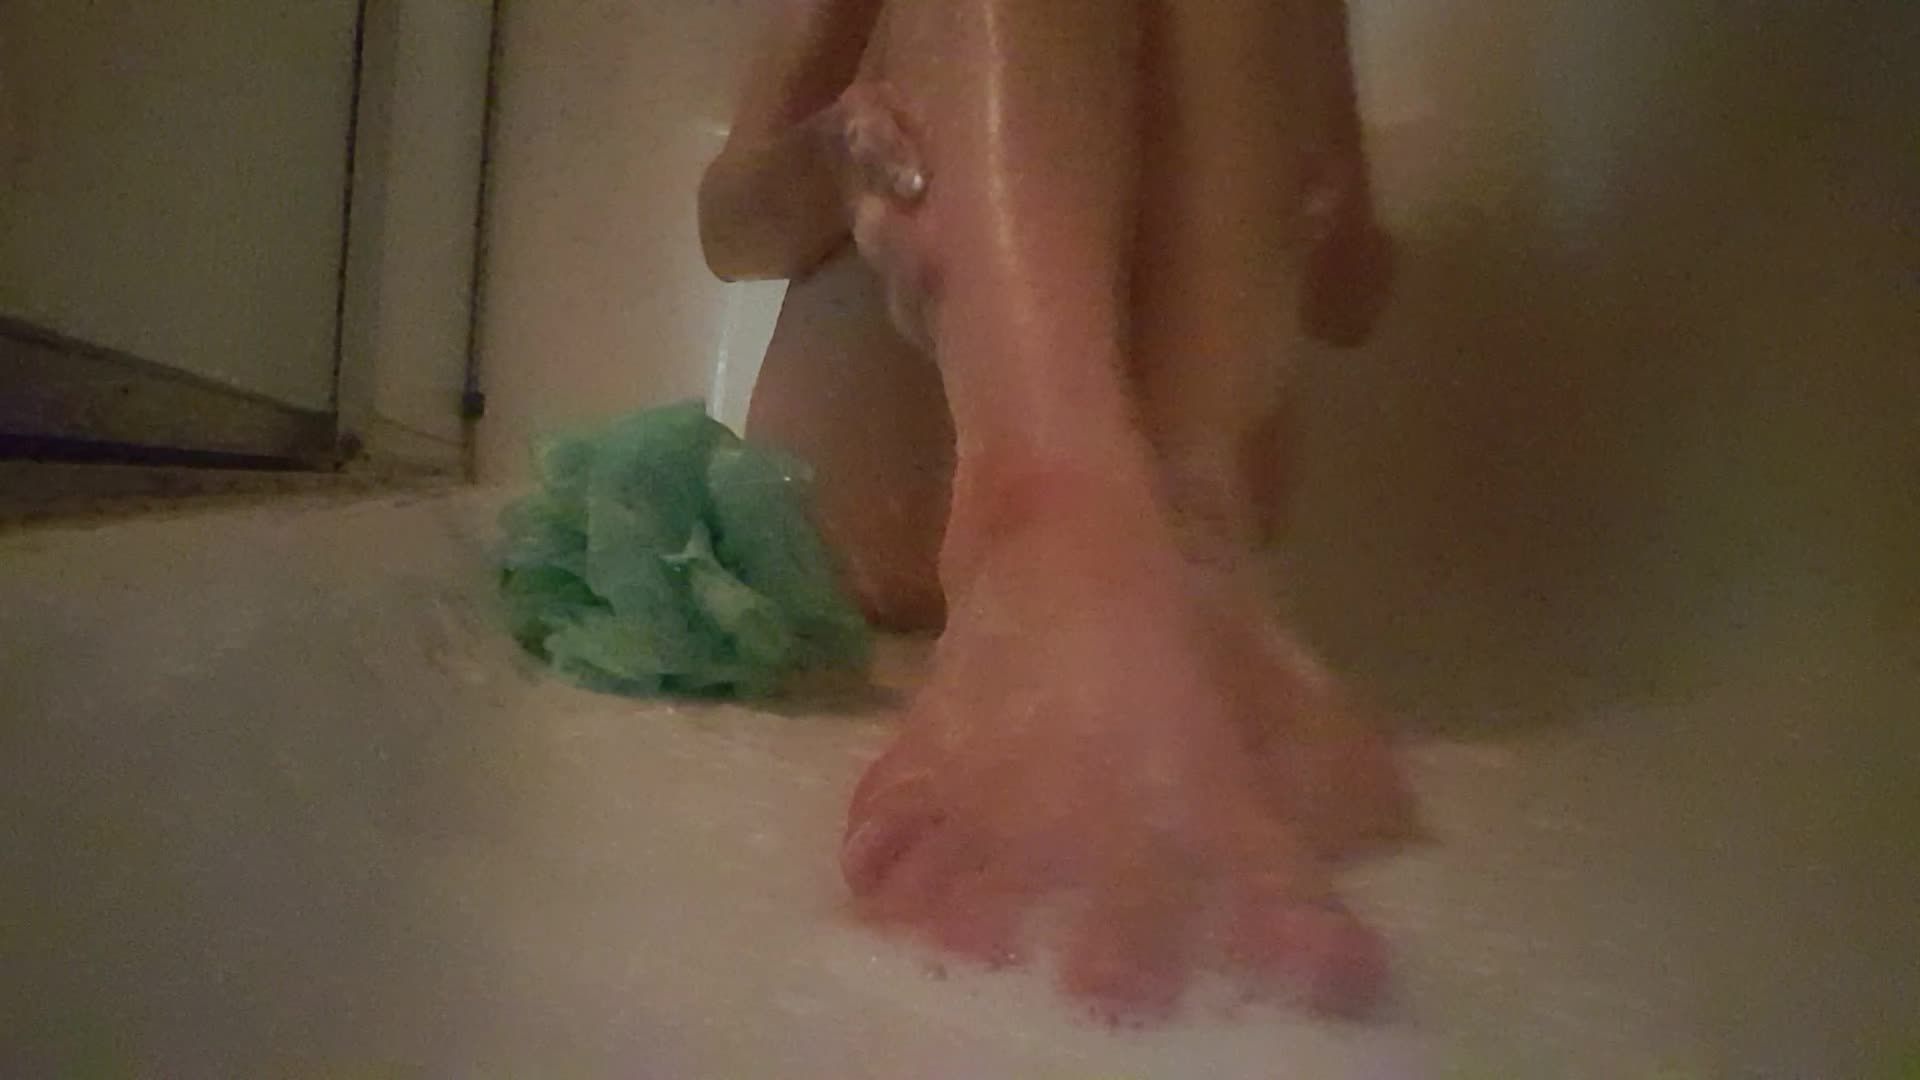 Naked feet play in the shower